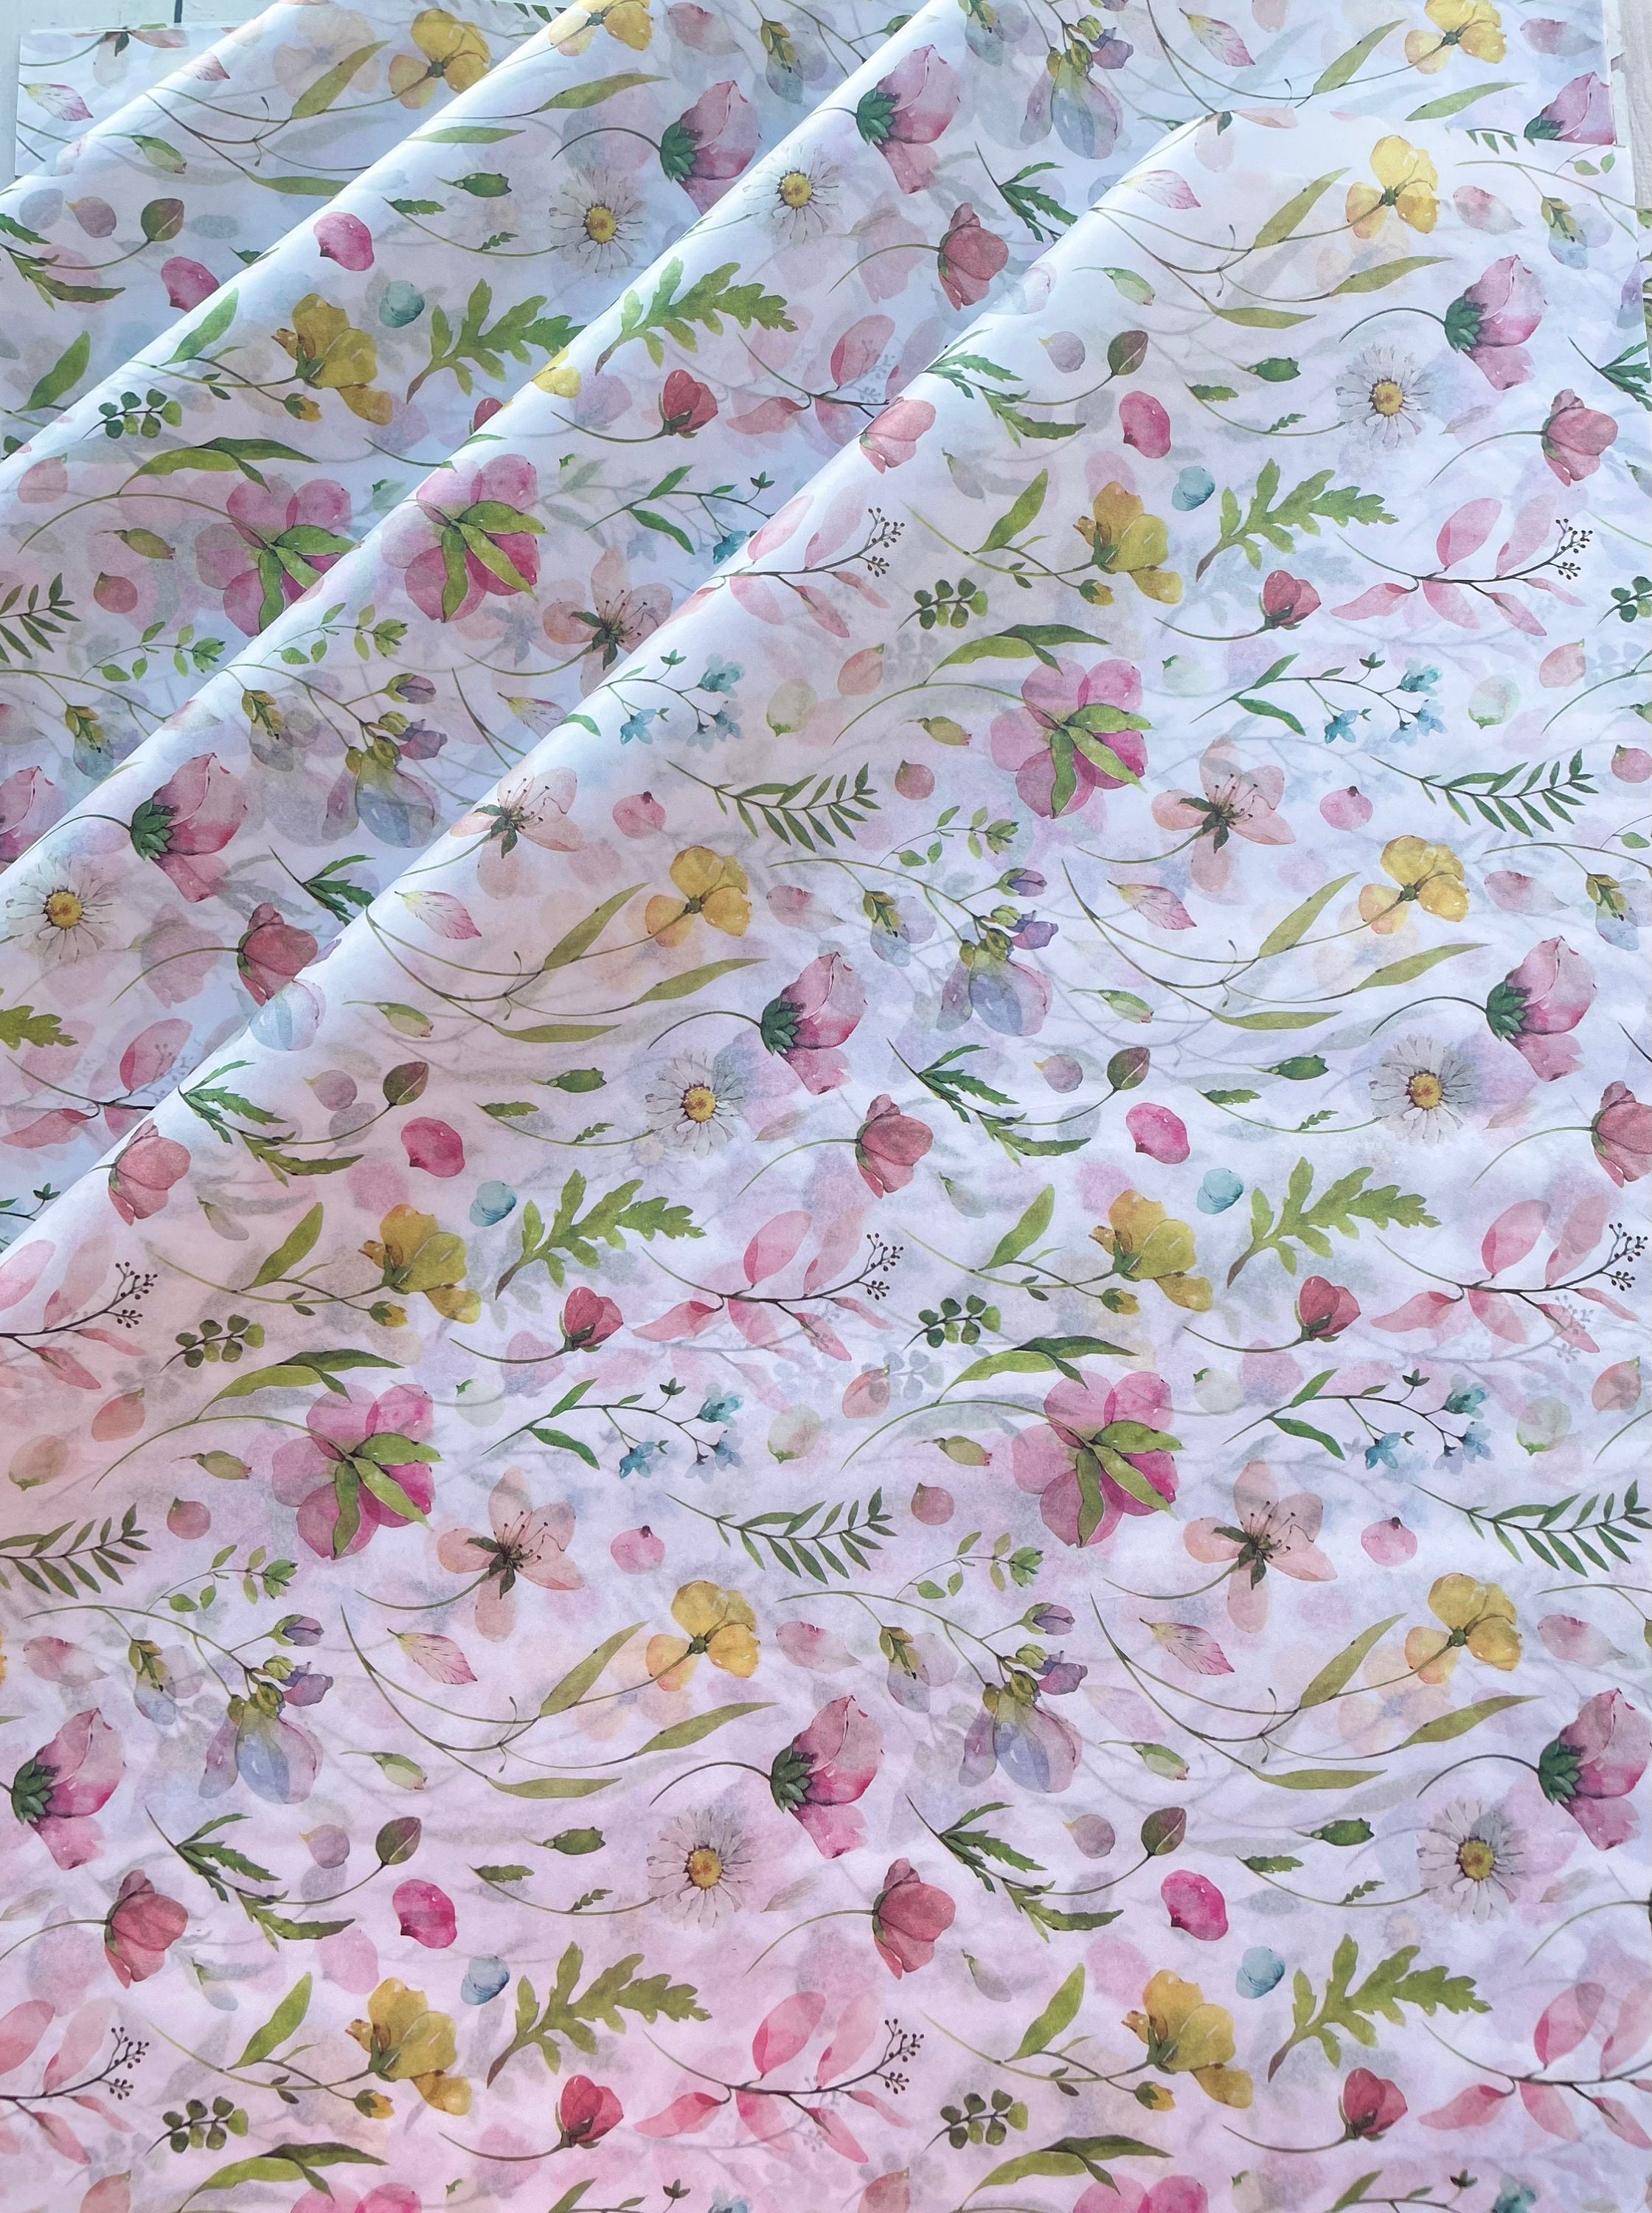 Peony Pattern Wrapping Paper Roll Pink Flower Peony Wedding Flower Peony Wrapping  Paper, Summer Flower Pattern Gift Wrap, Peony Print 